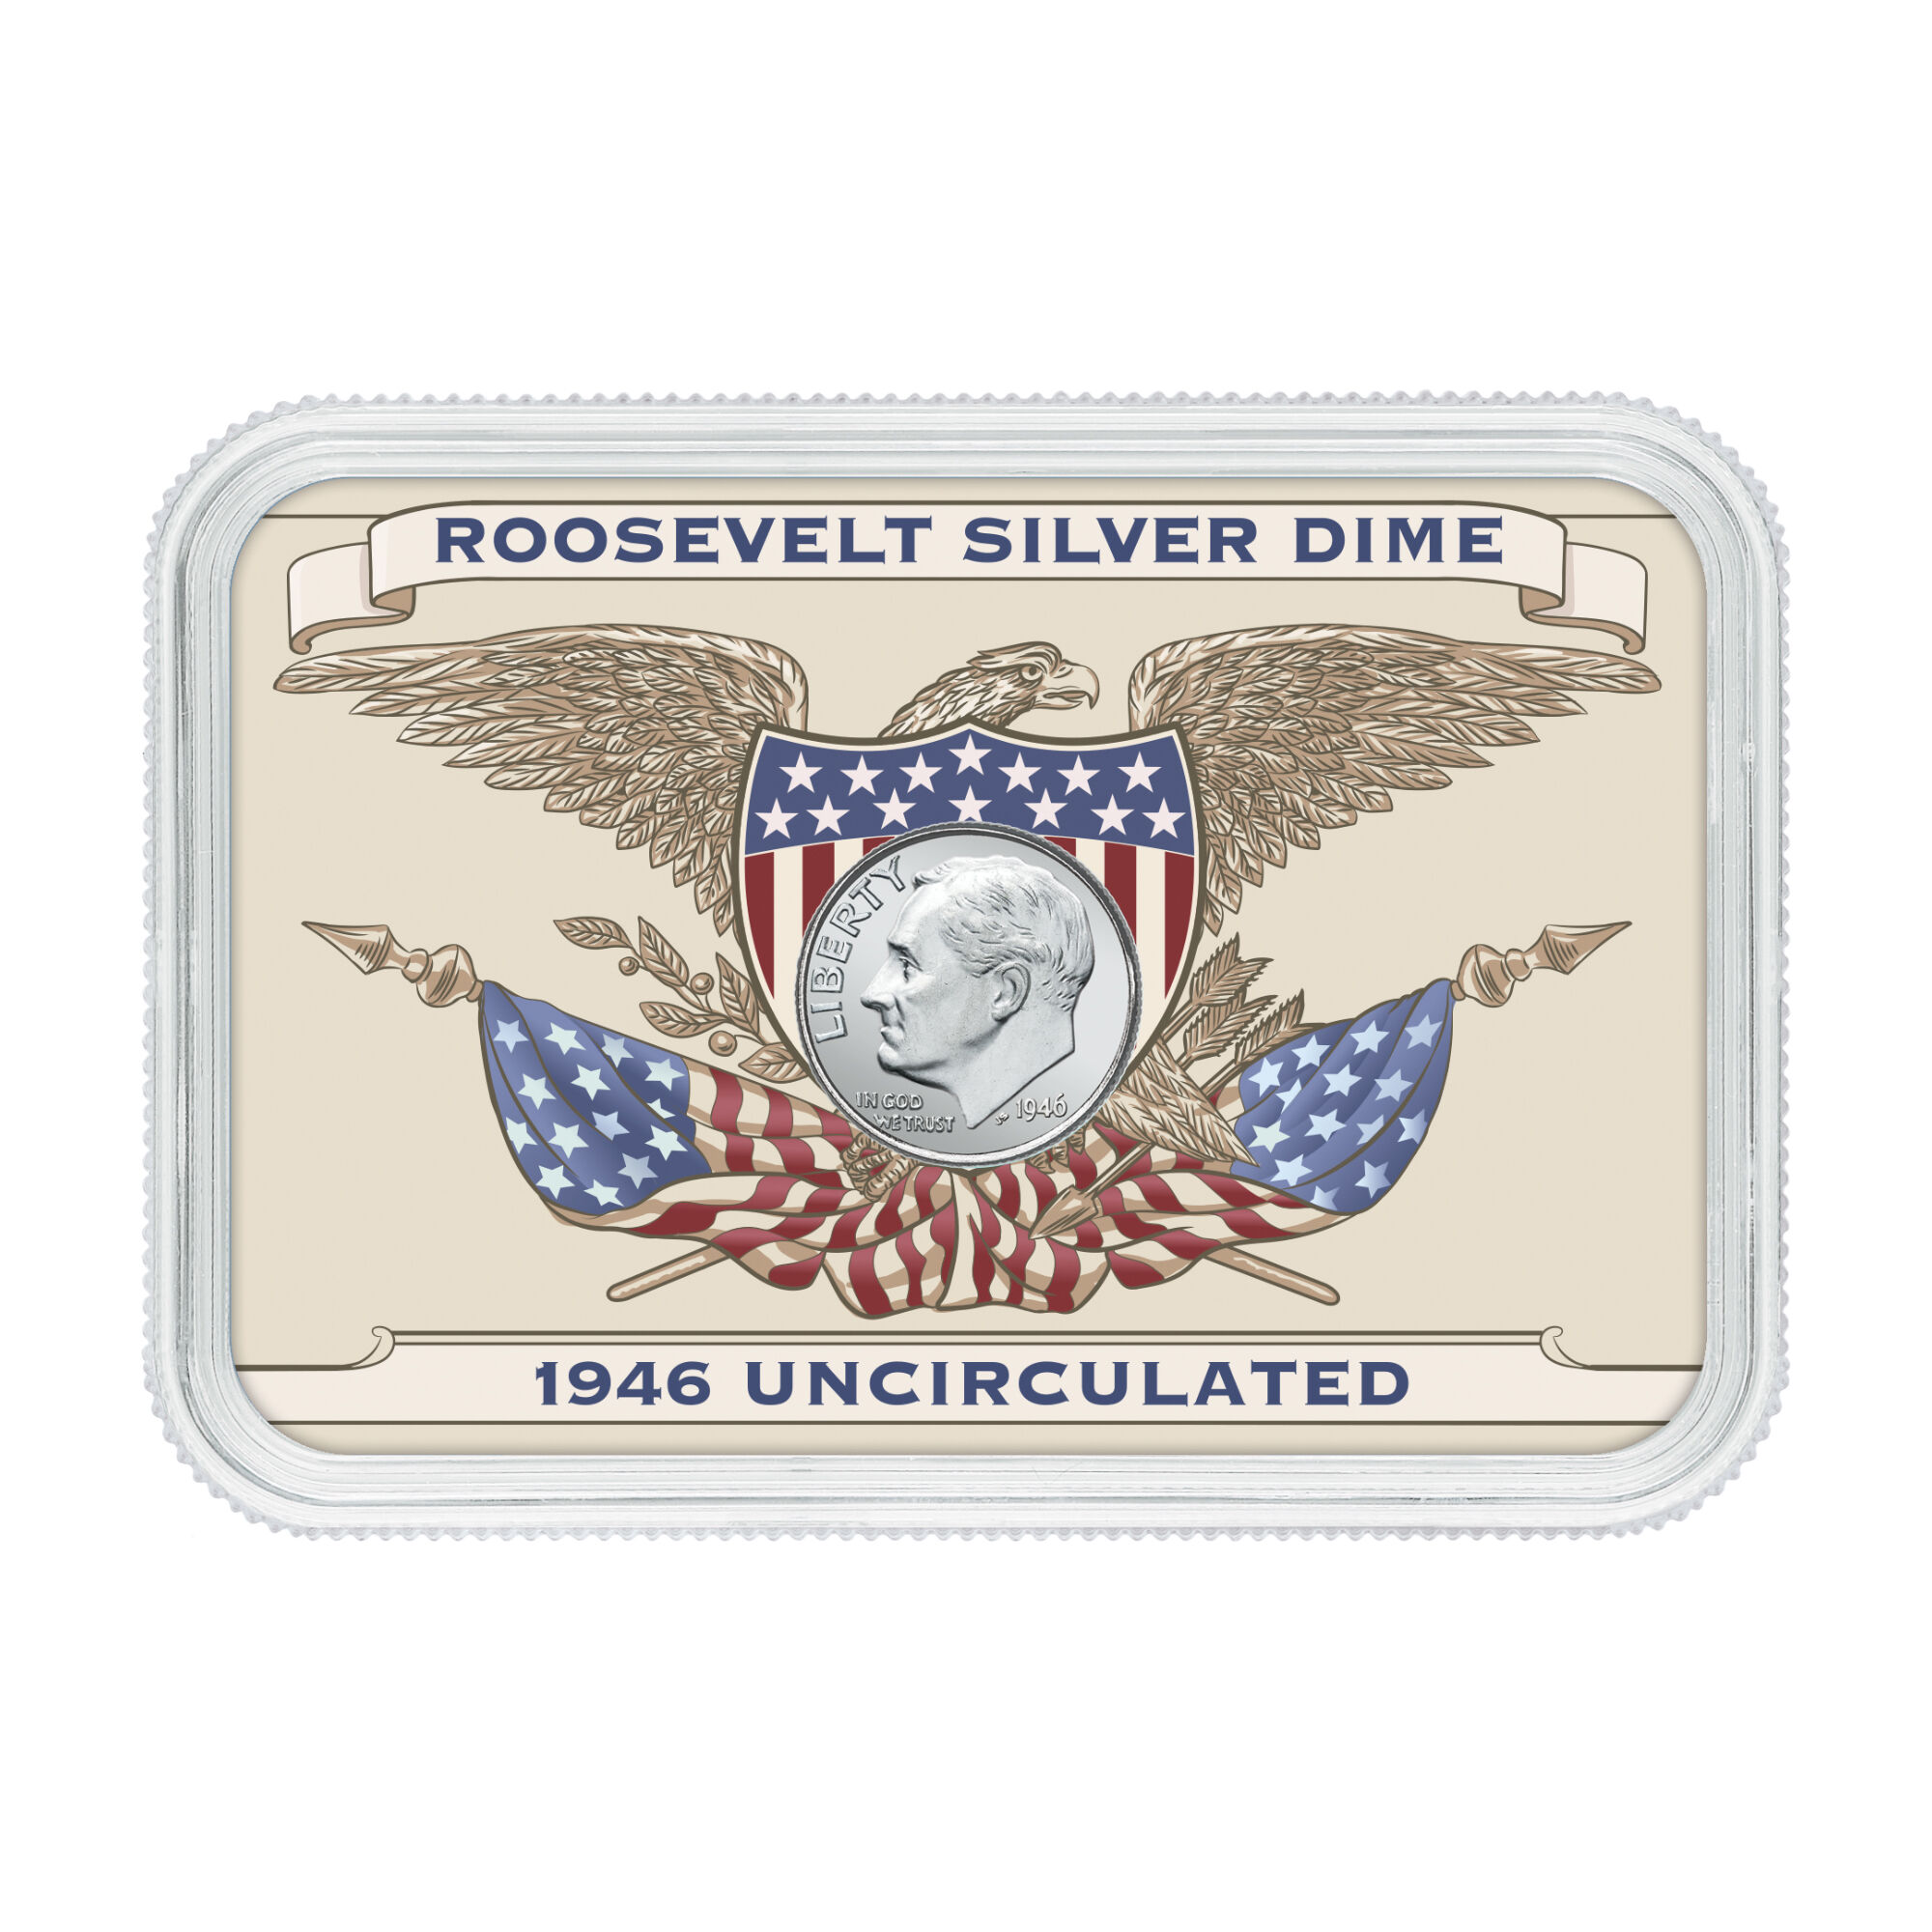 The Complete Uncirculated Roosevelt Silver Dimes 10645 0026 a coinpanel